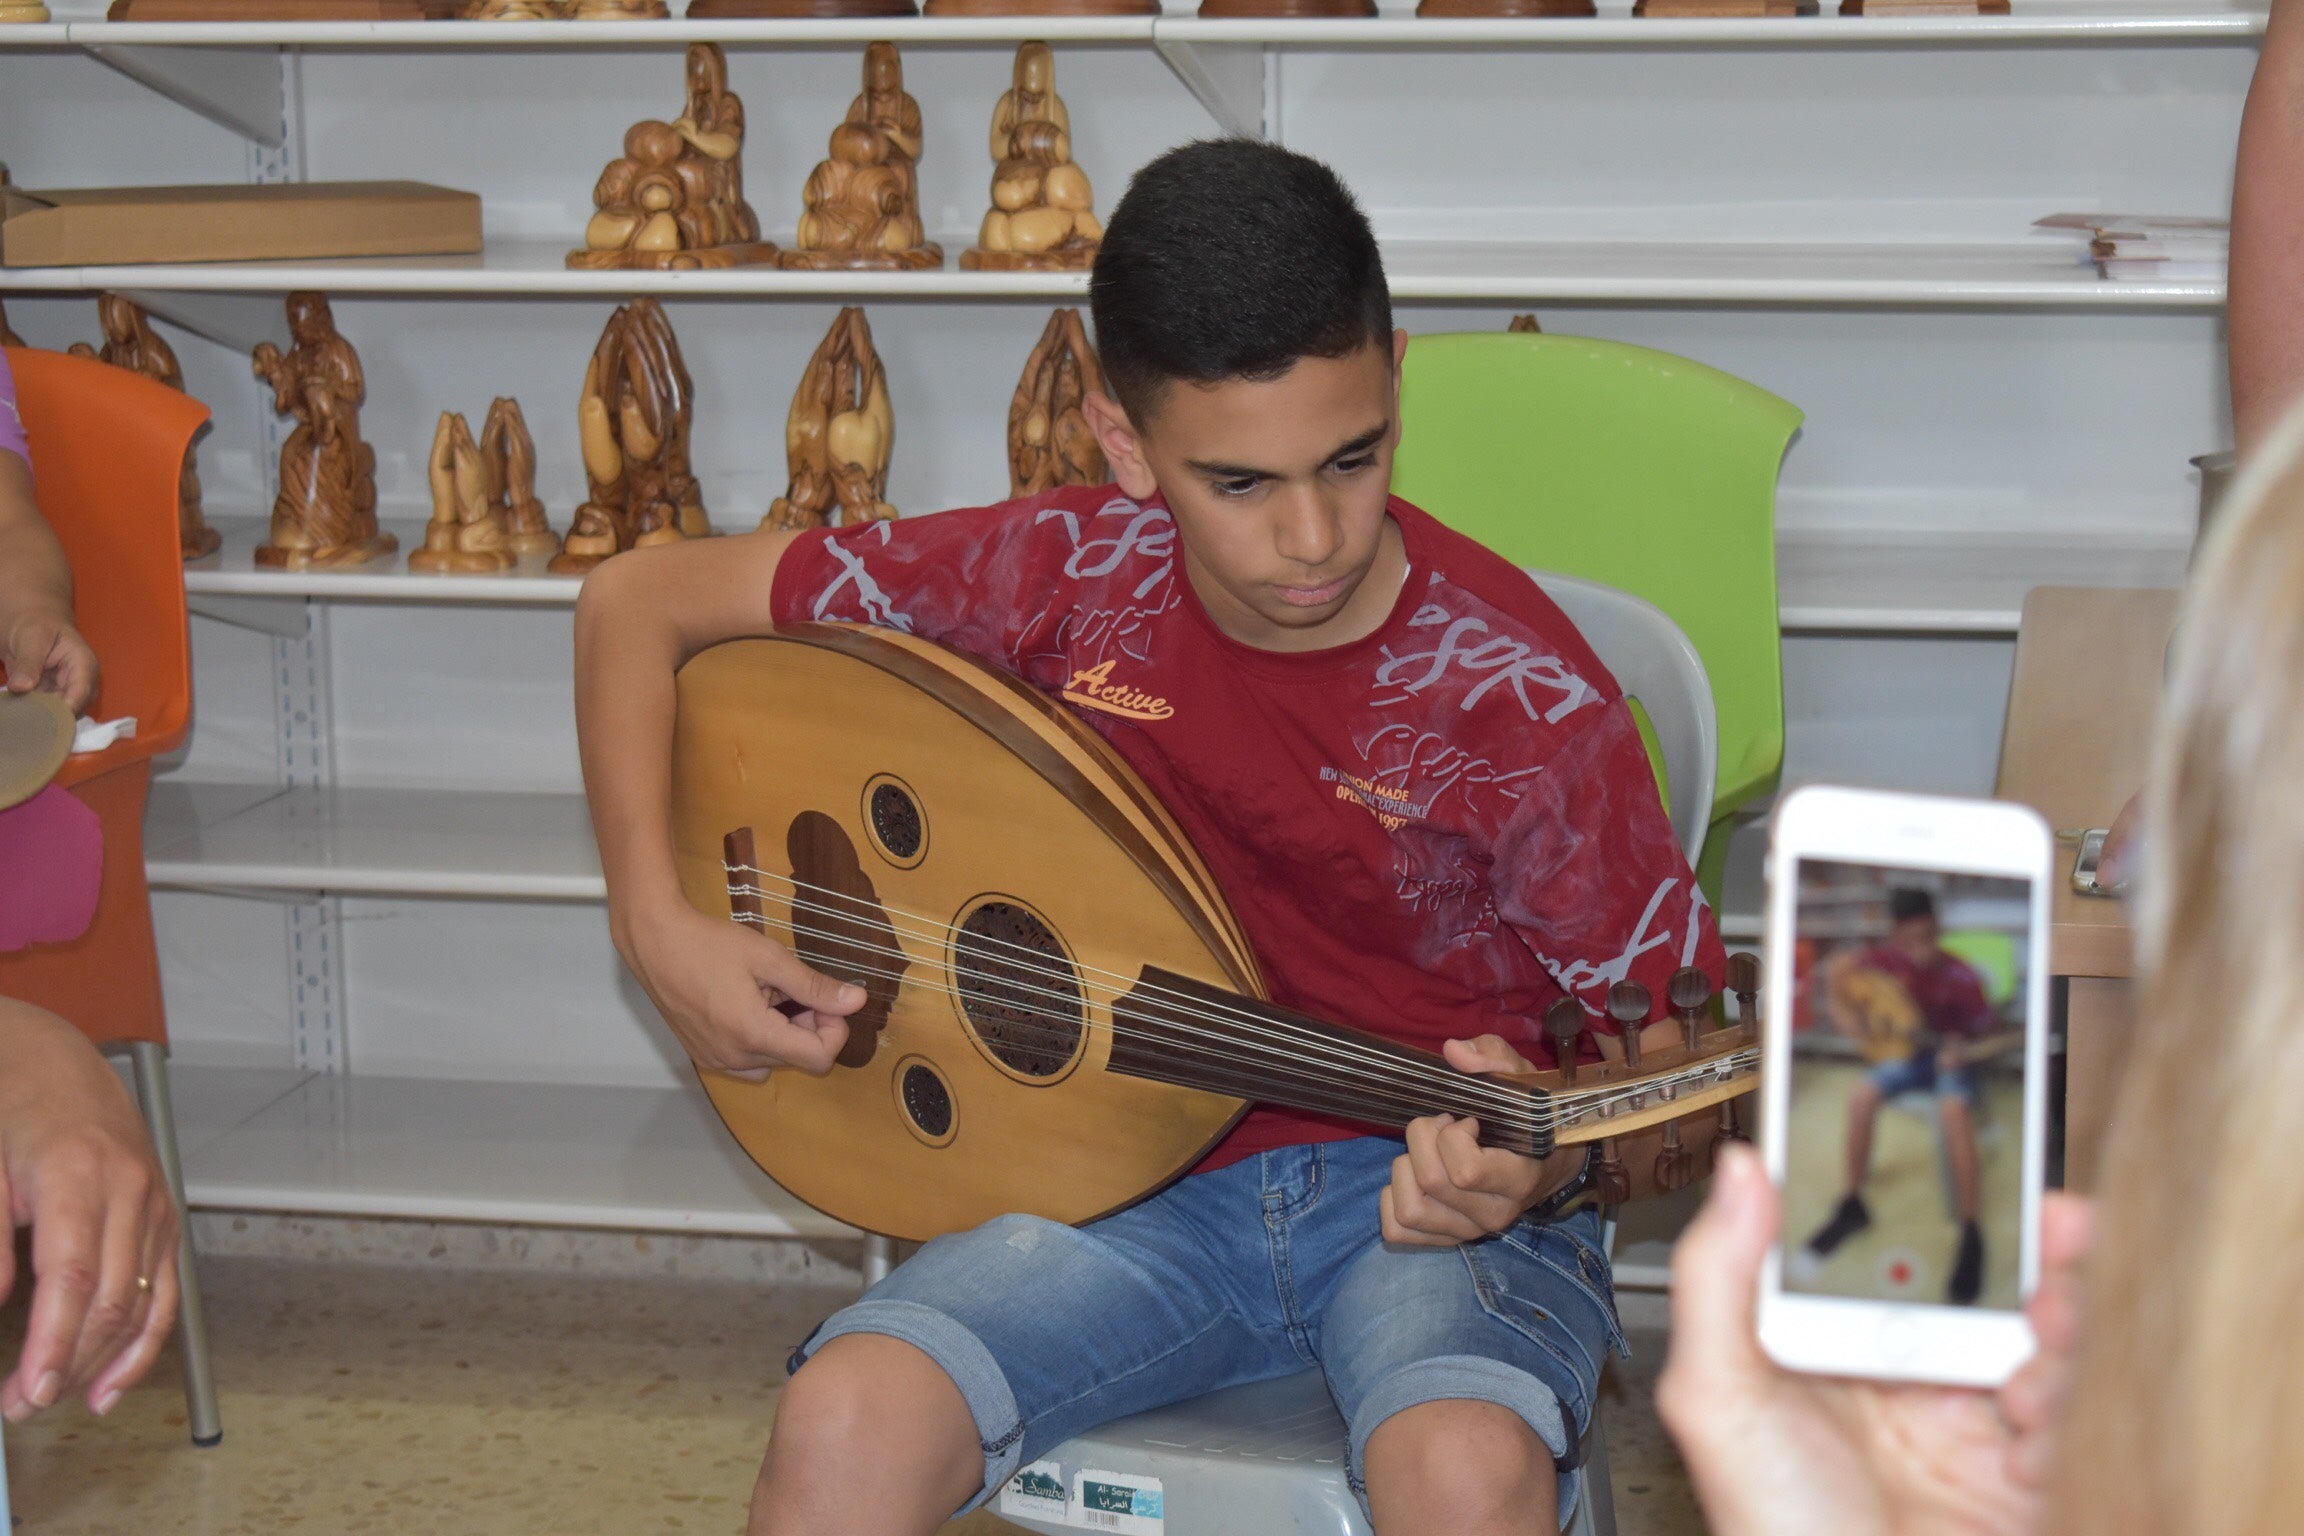 Faris played traditional instruments